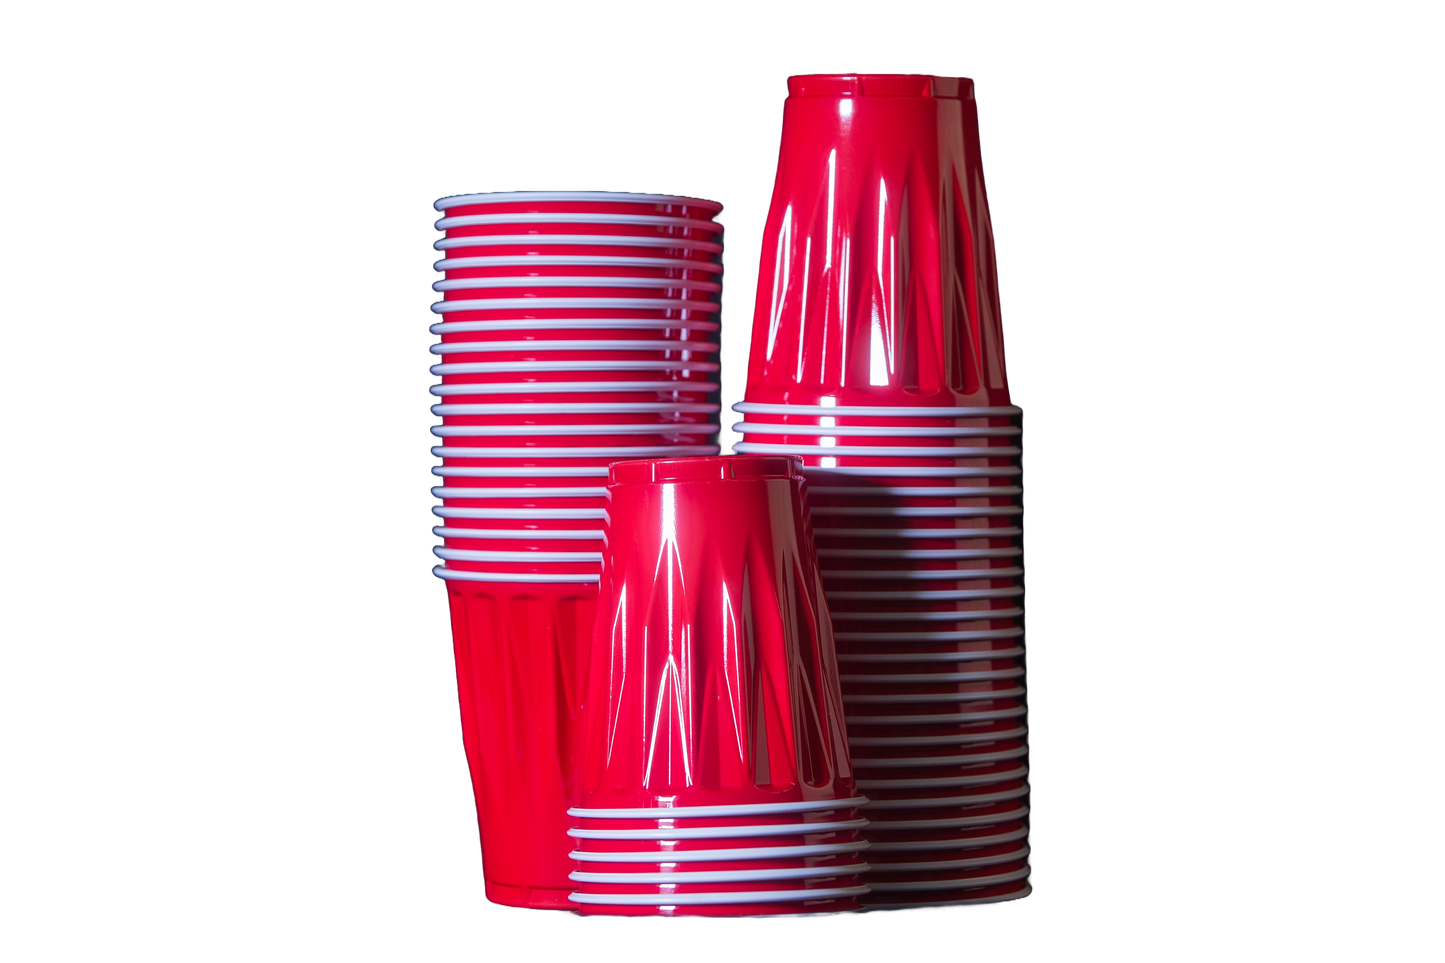 Boulder Red Solo Cups, 50 cups